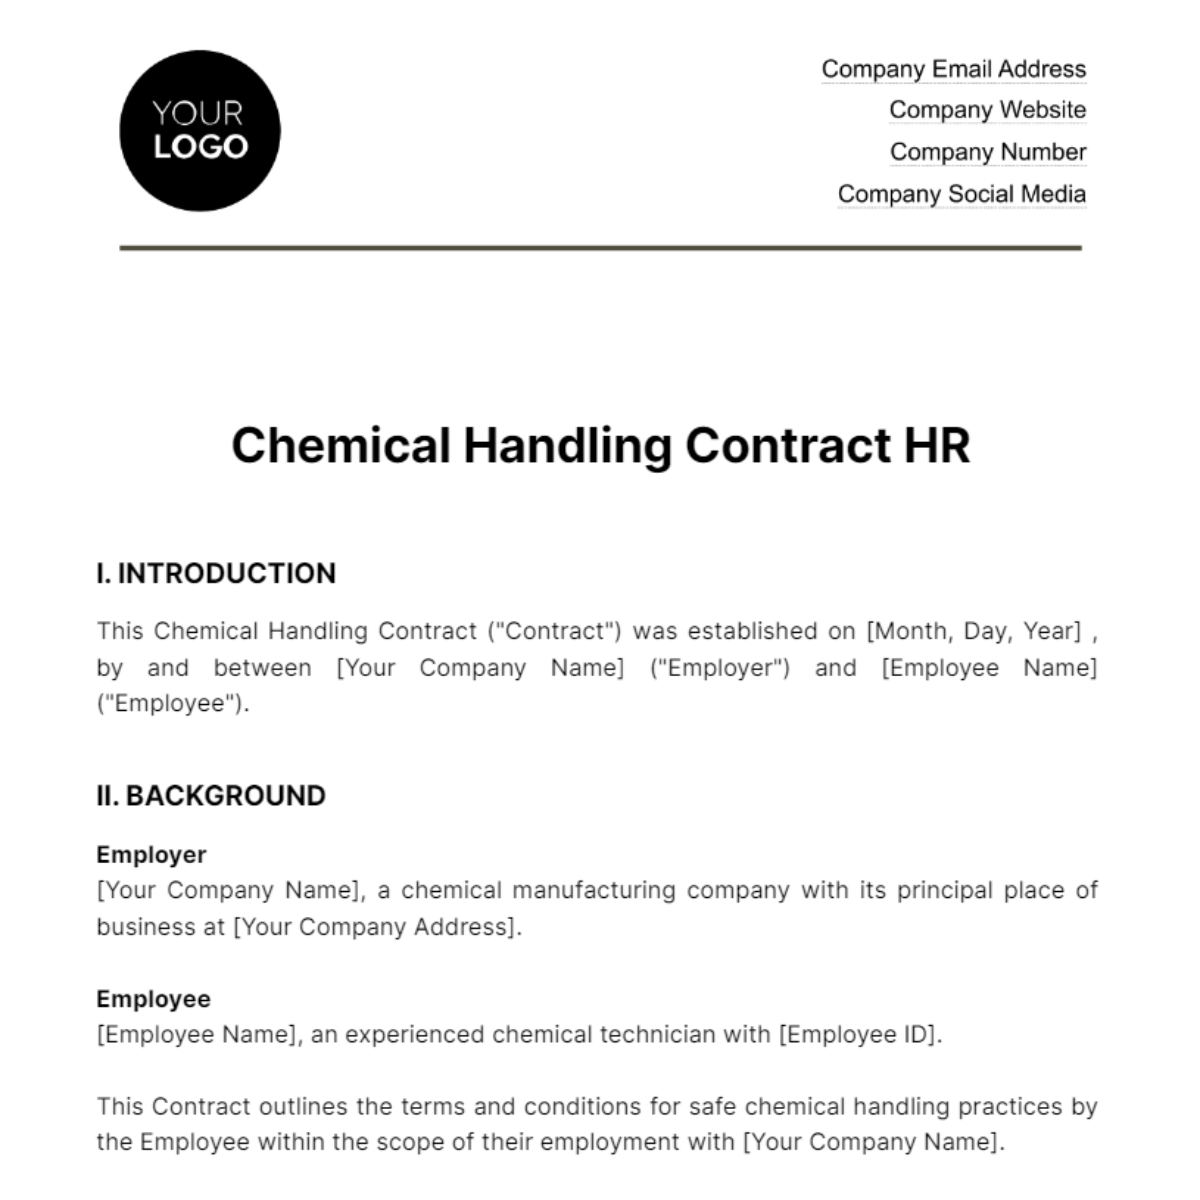 Free Chemical Handling Contract HR Template